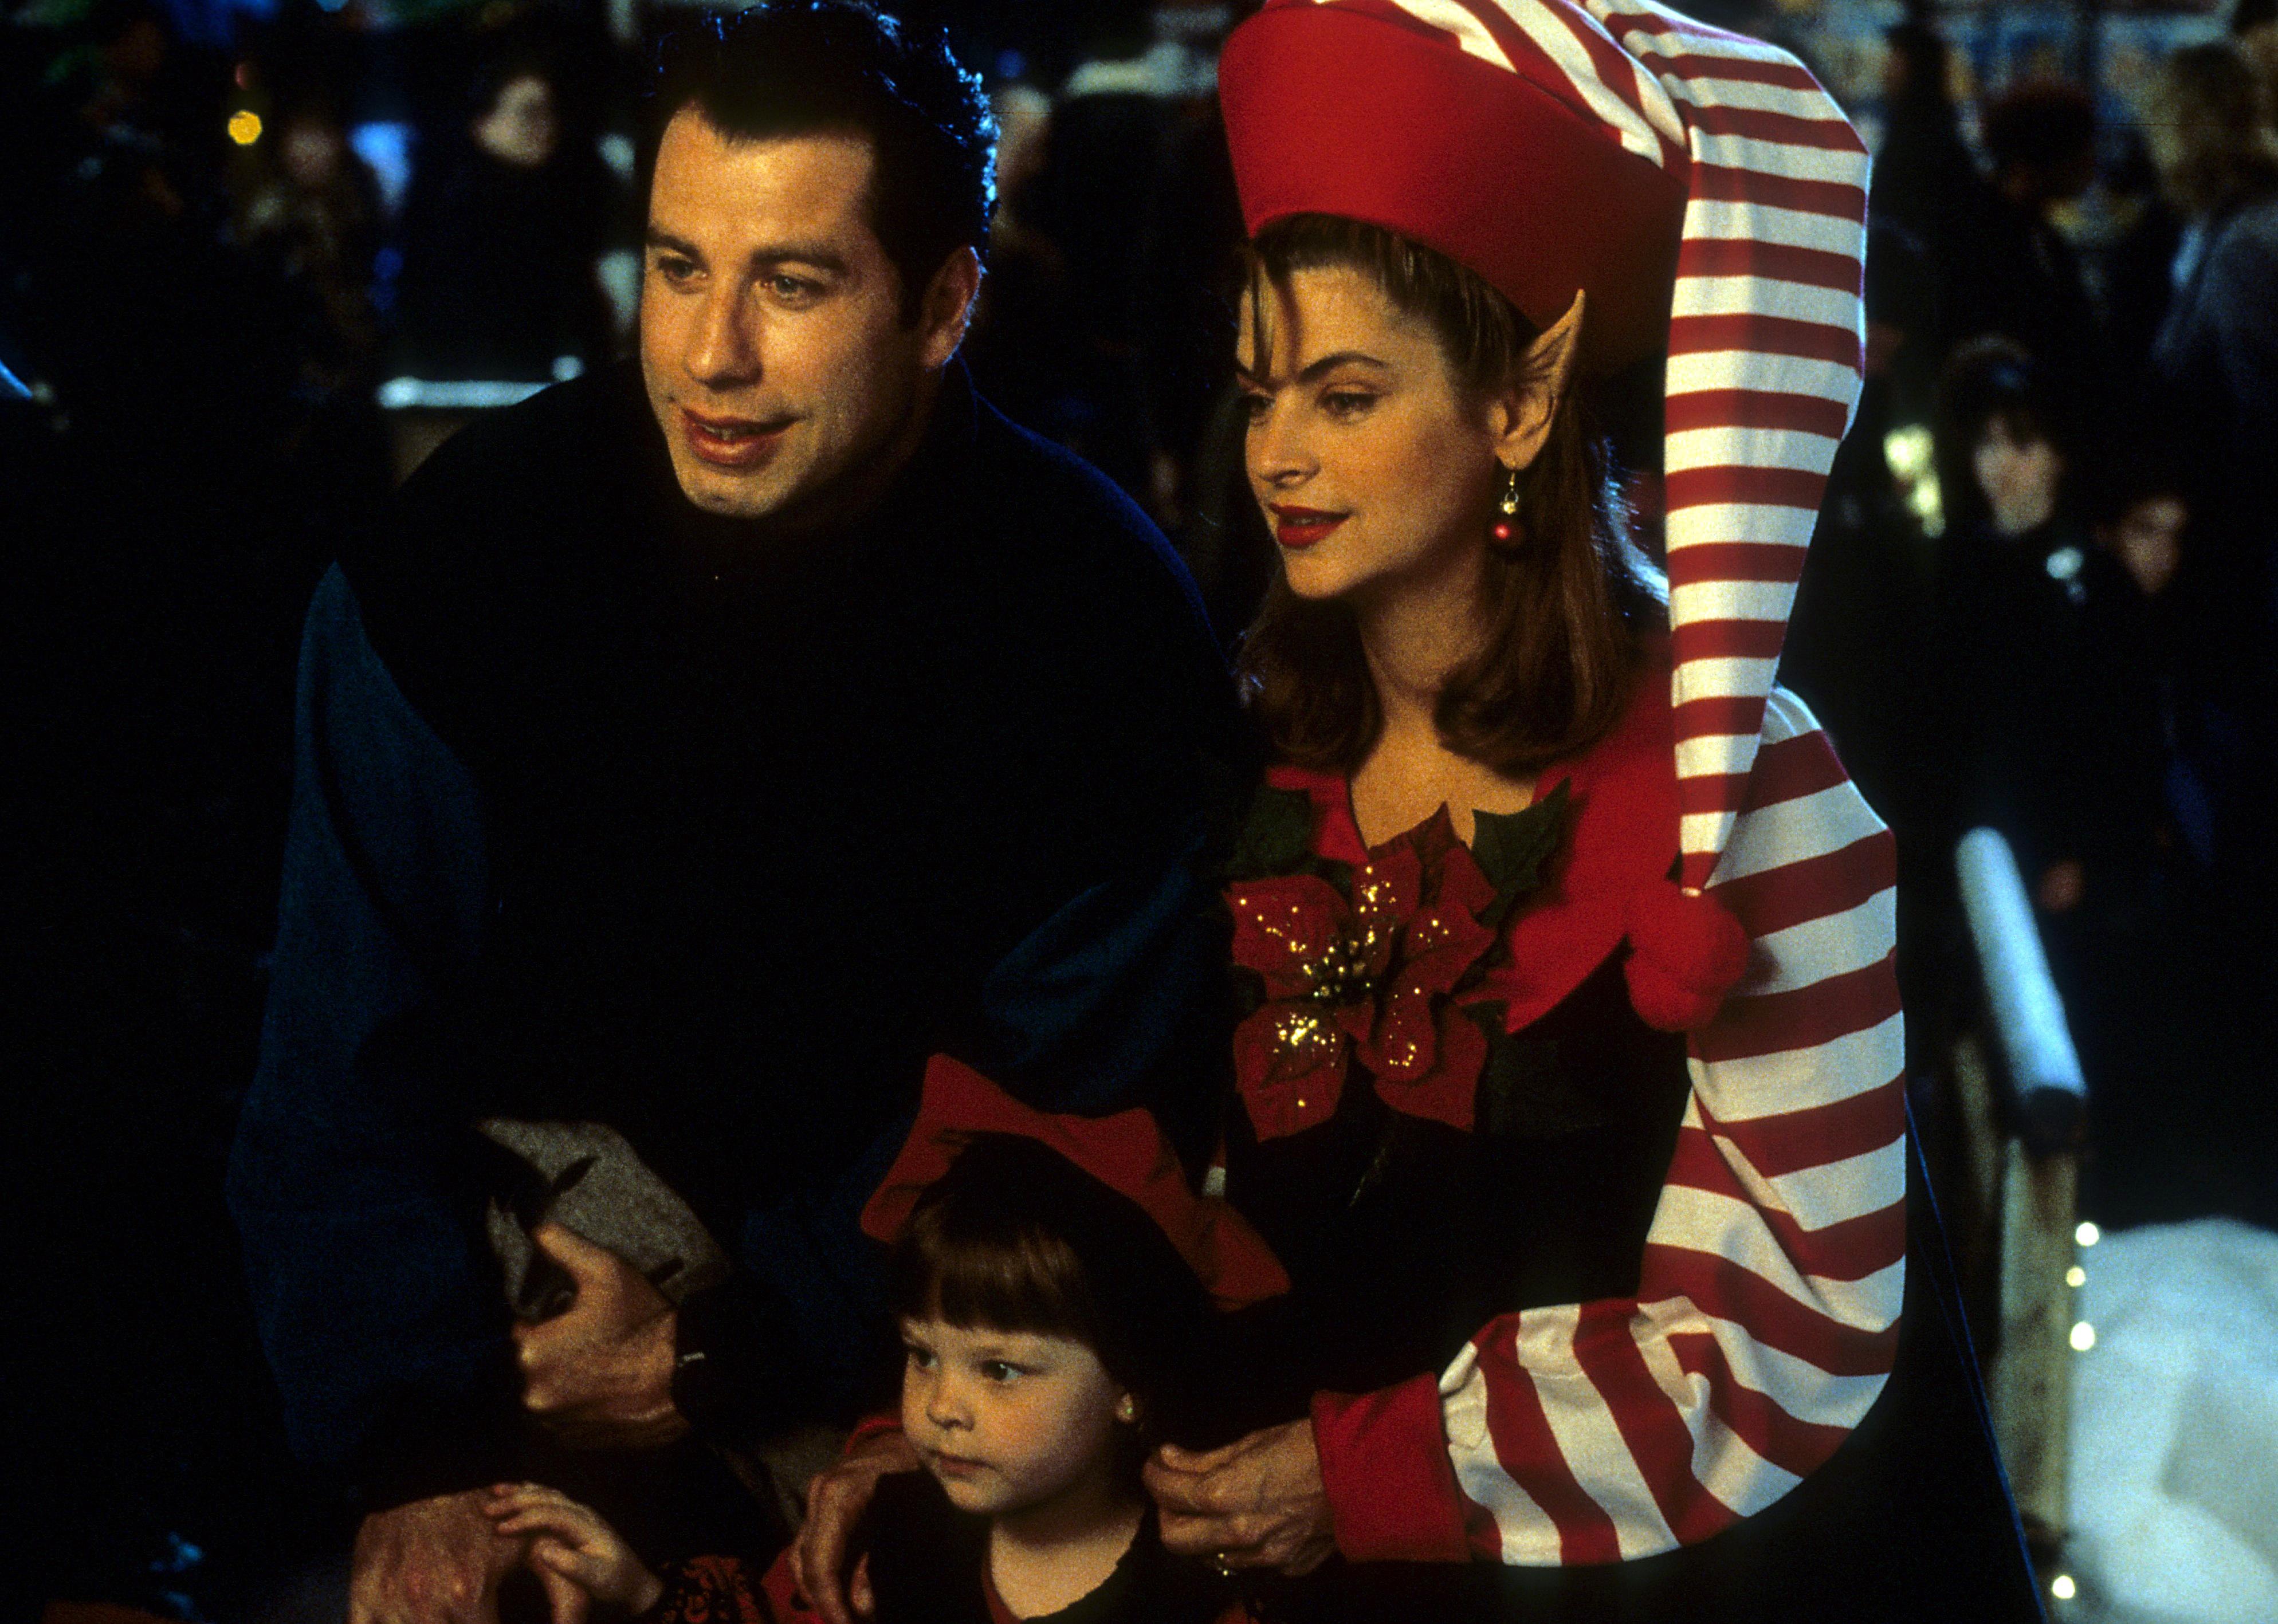 Kirstie Alley dressed as an elf taking a photo with John Travolta and a little girl.